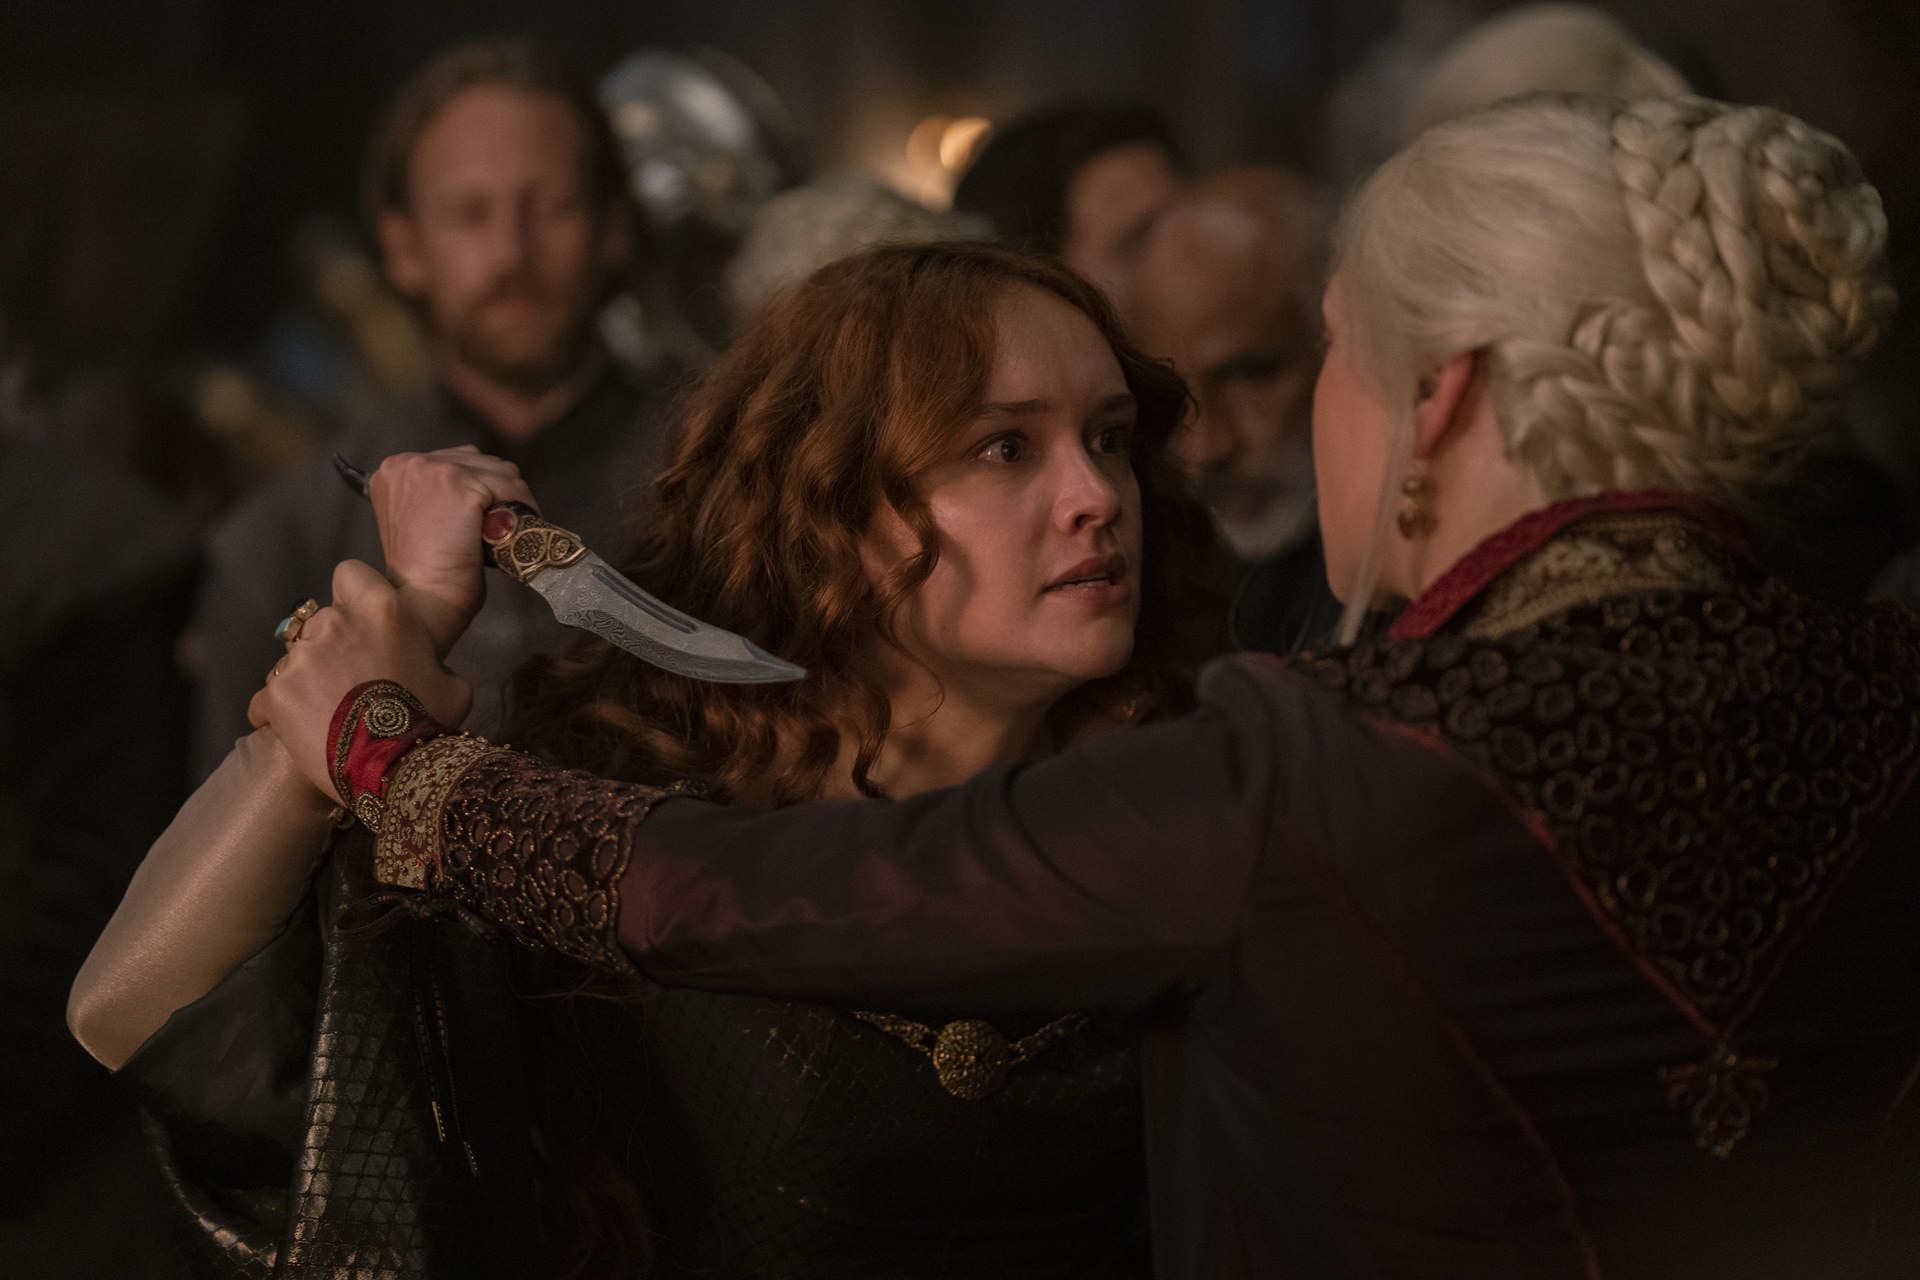 Alicent holds a dagger while Rhaenyra restrains her